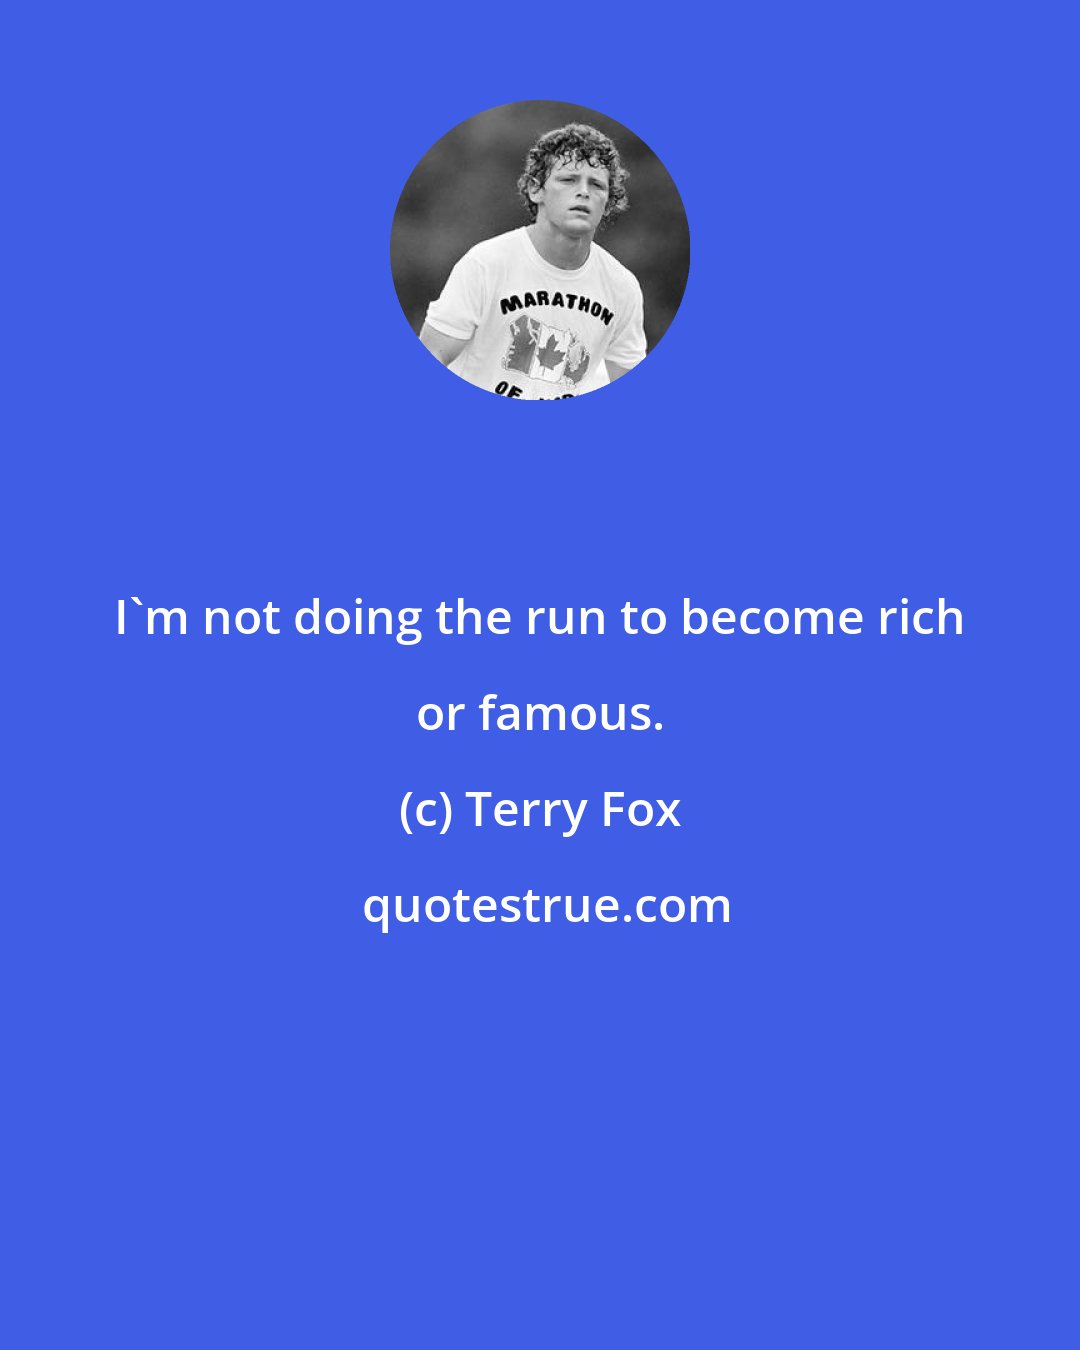 Terry Fox: I'm not doing the run to become rich or famous.